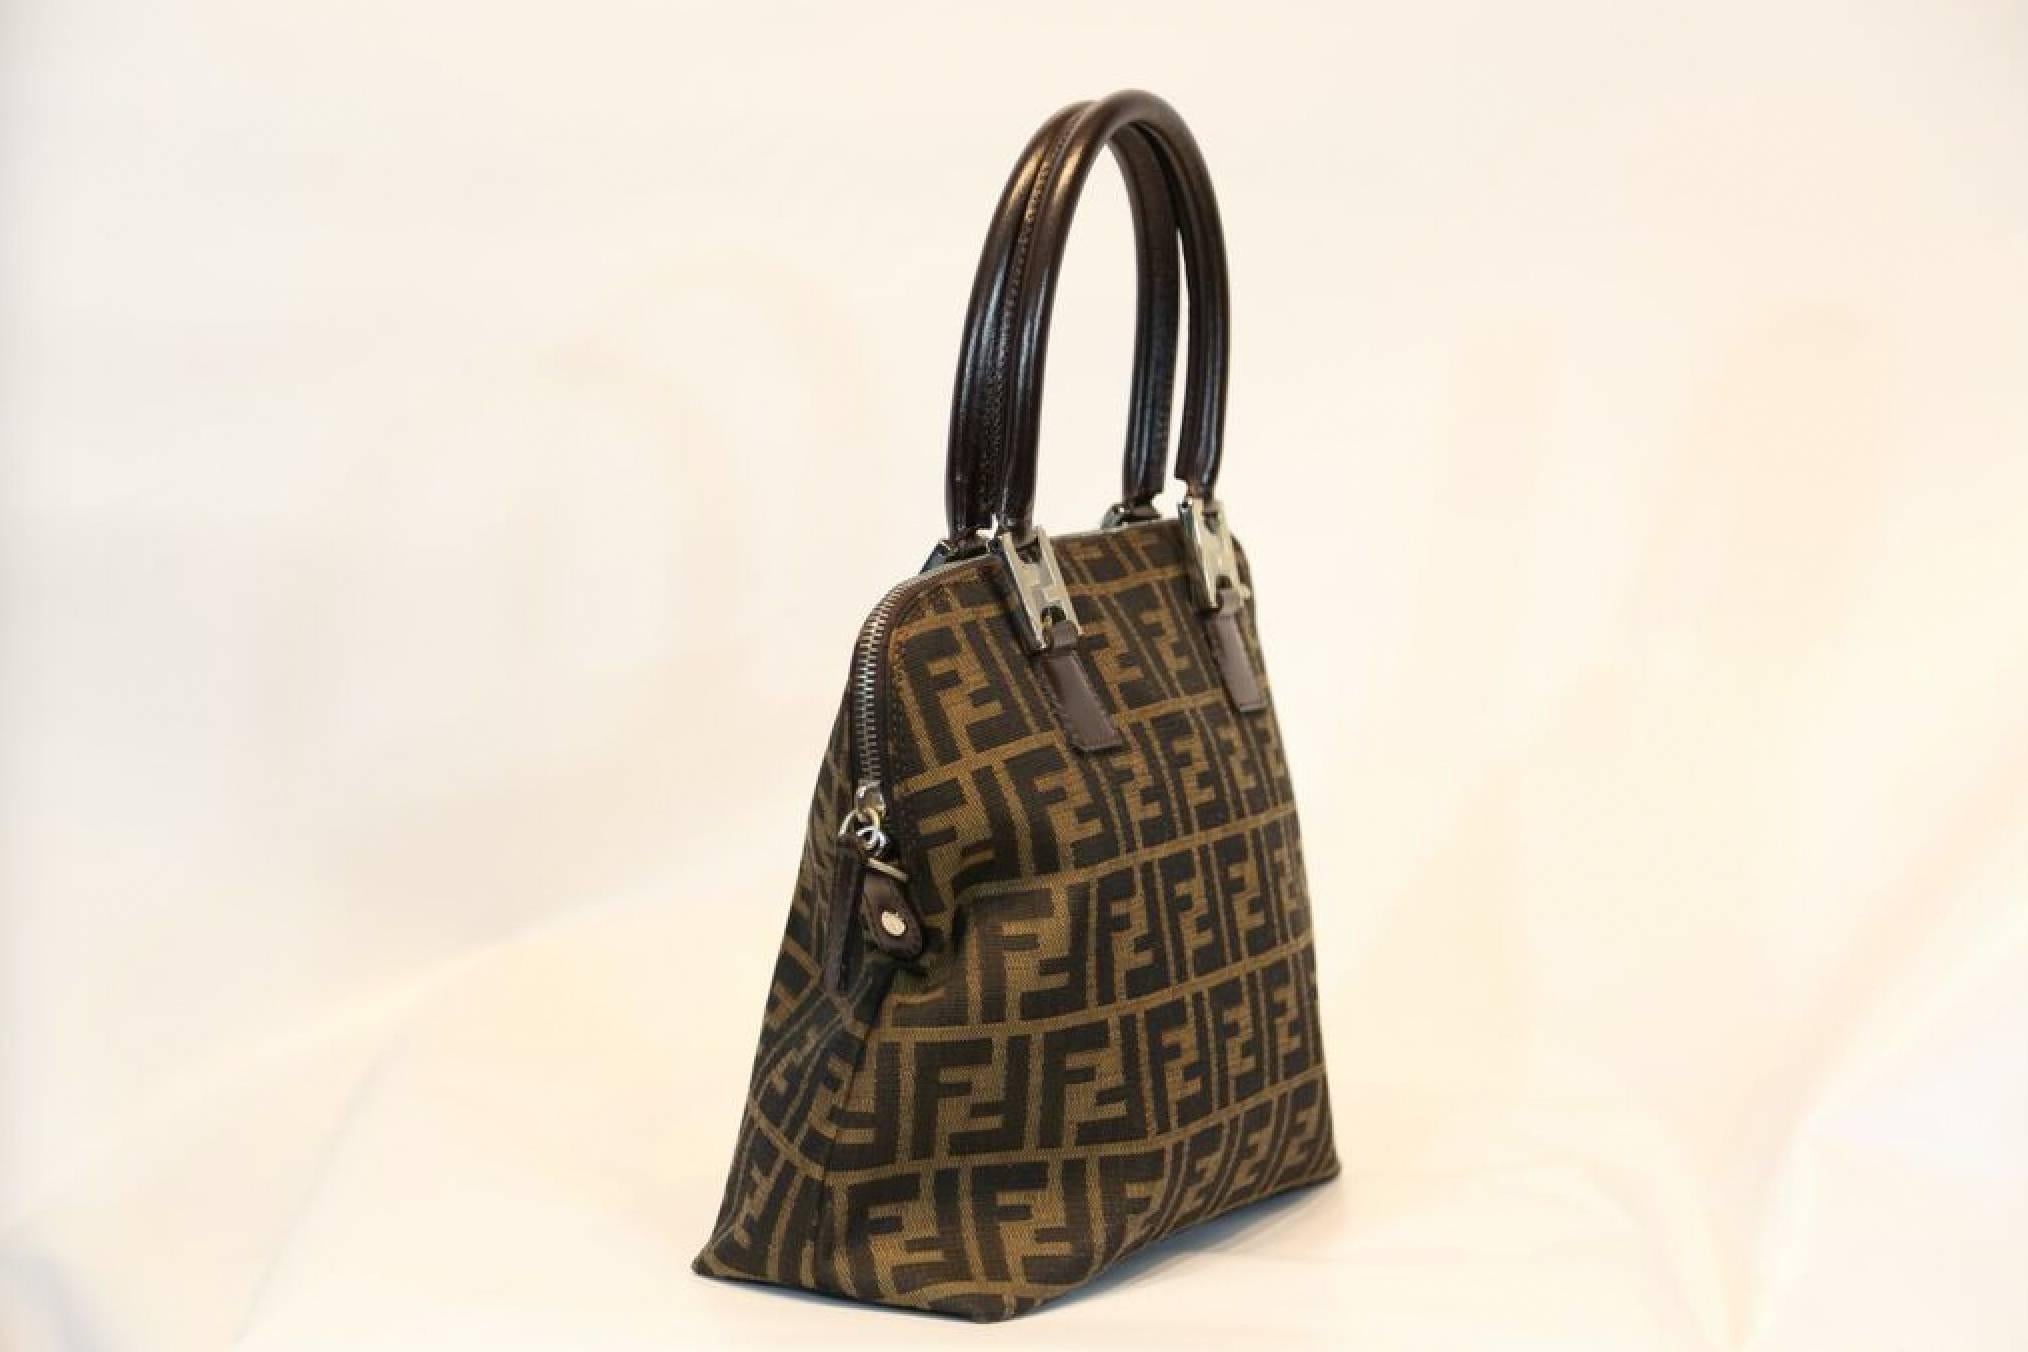 Women's Fendi Brown Leather Handbag with Gold Embossing